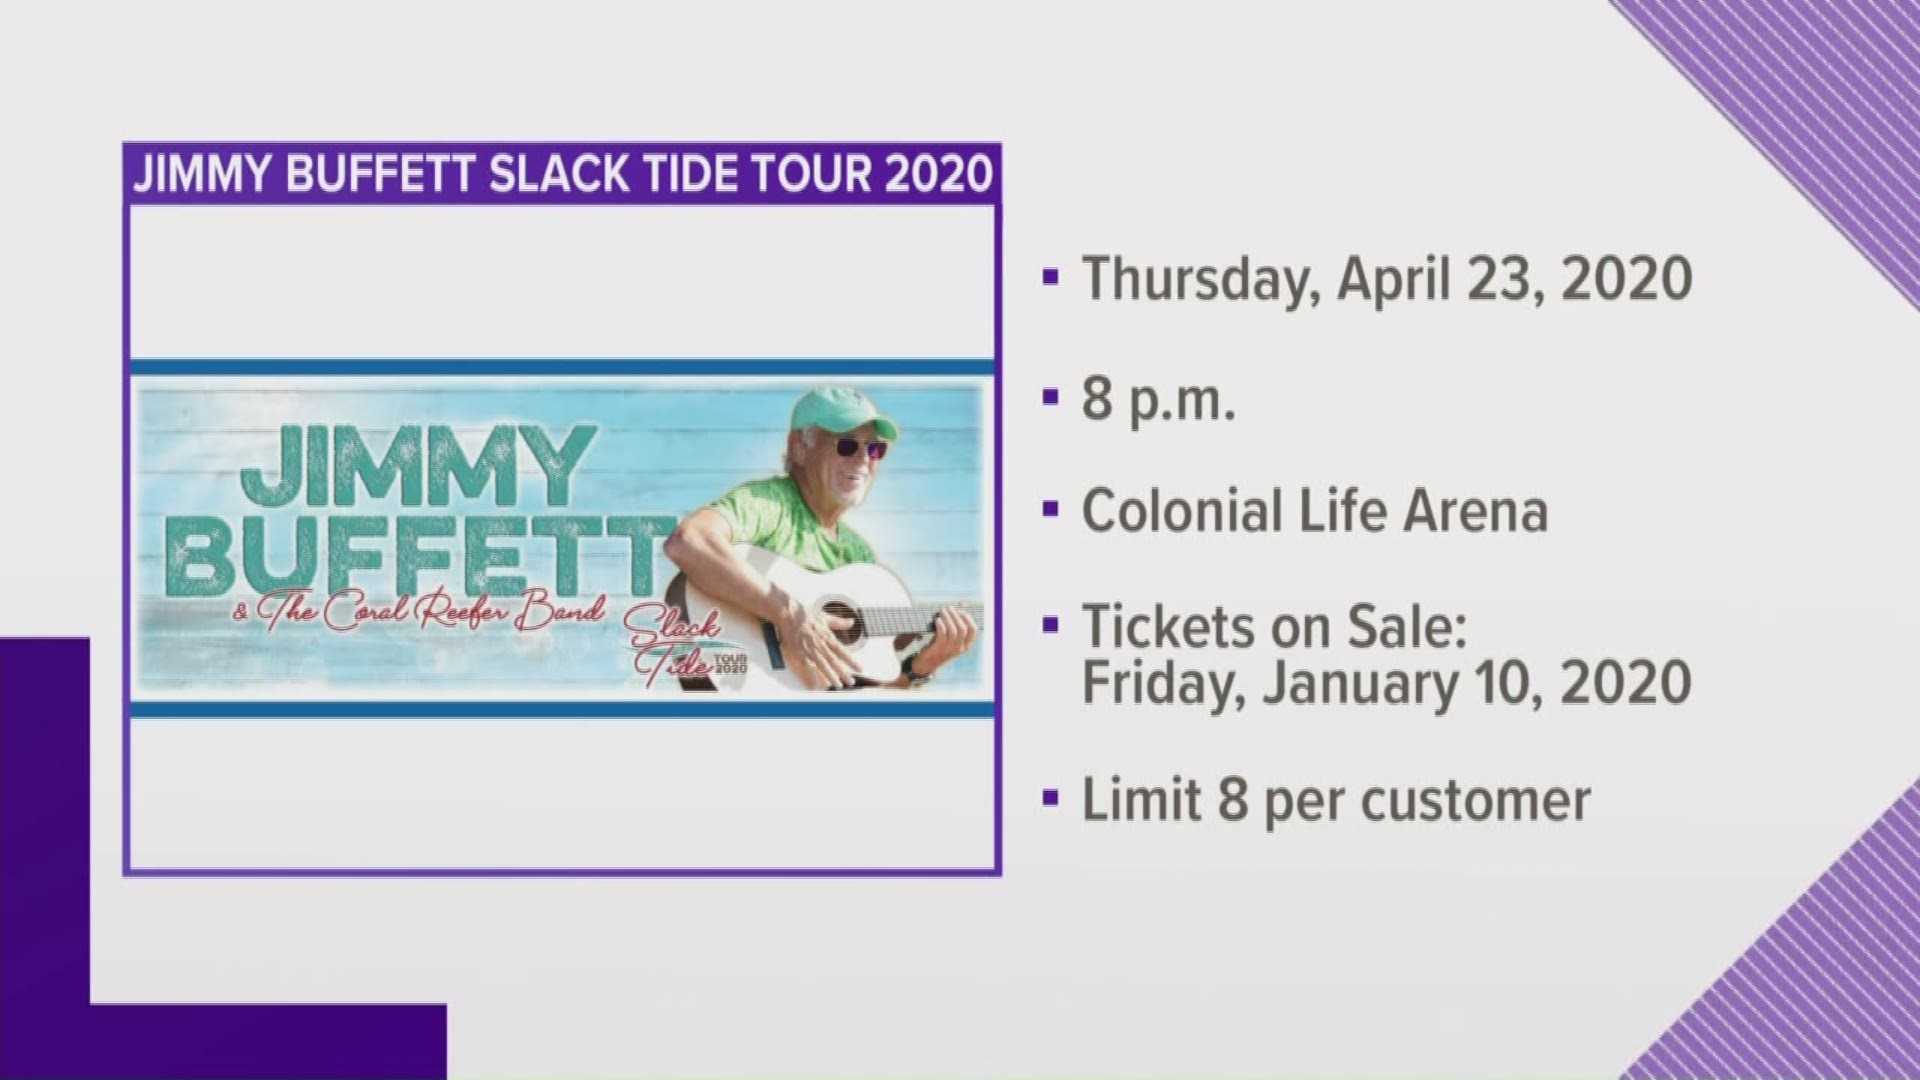 Jimmy Buffett to play Colonial Life Arena in April